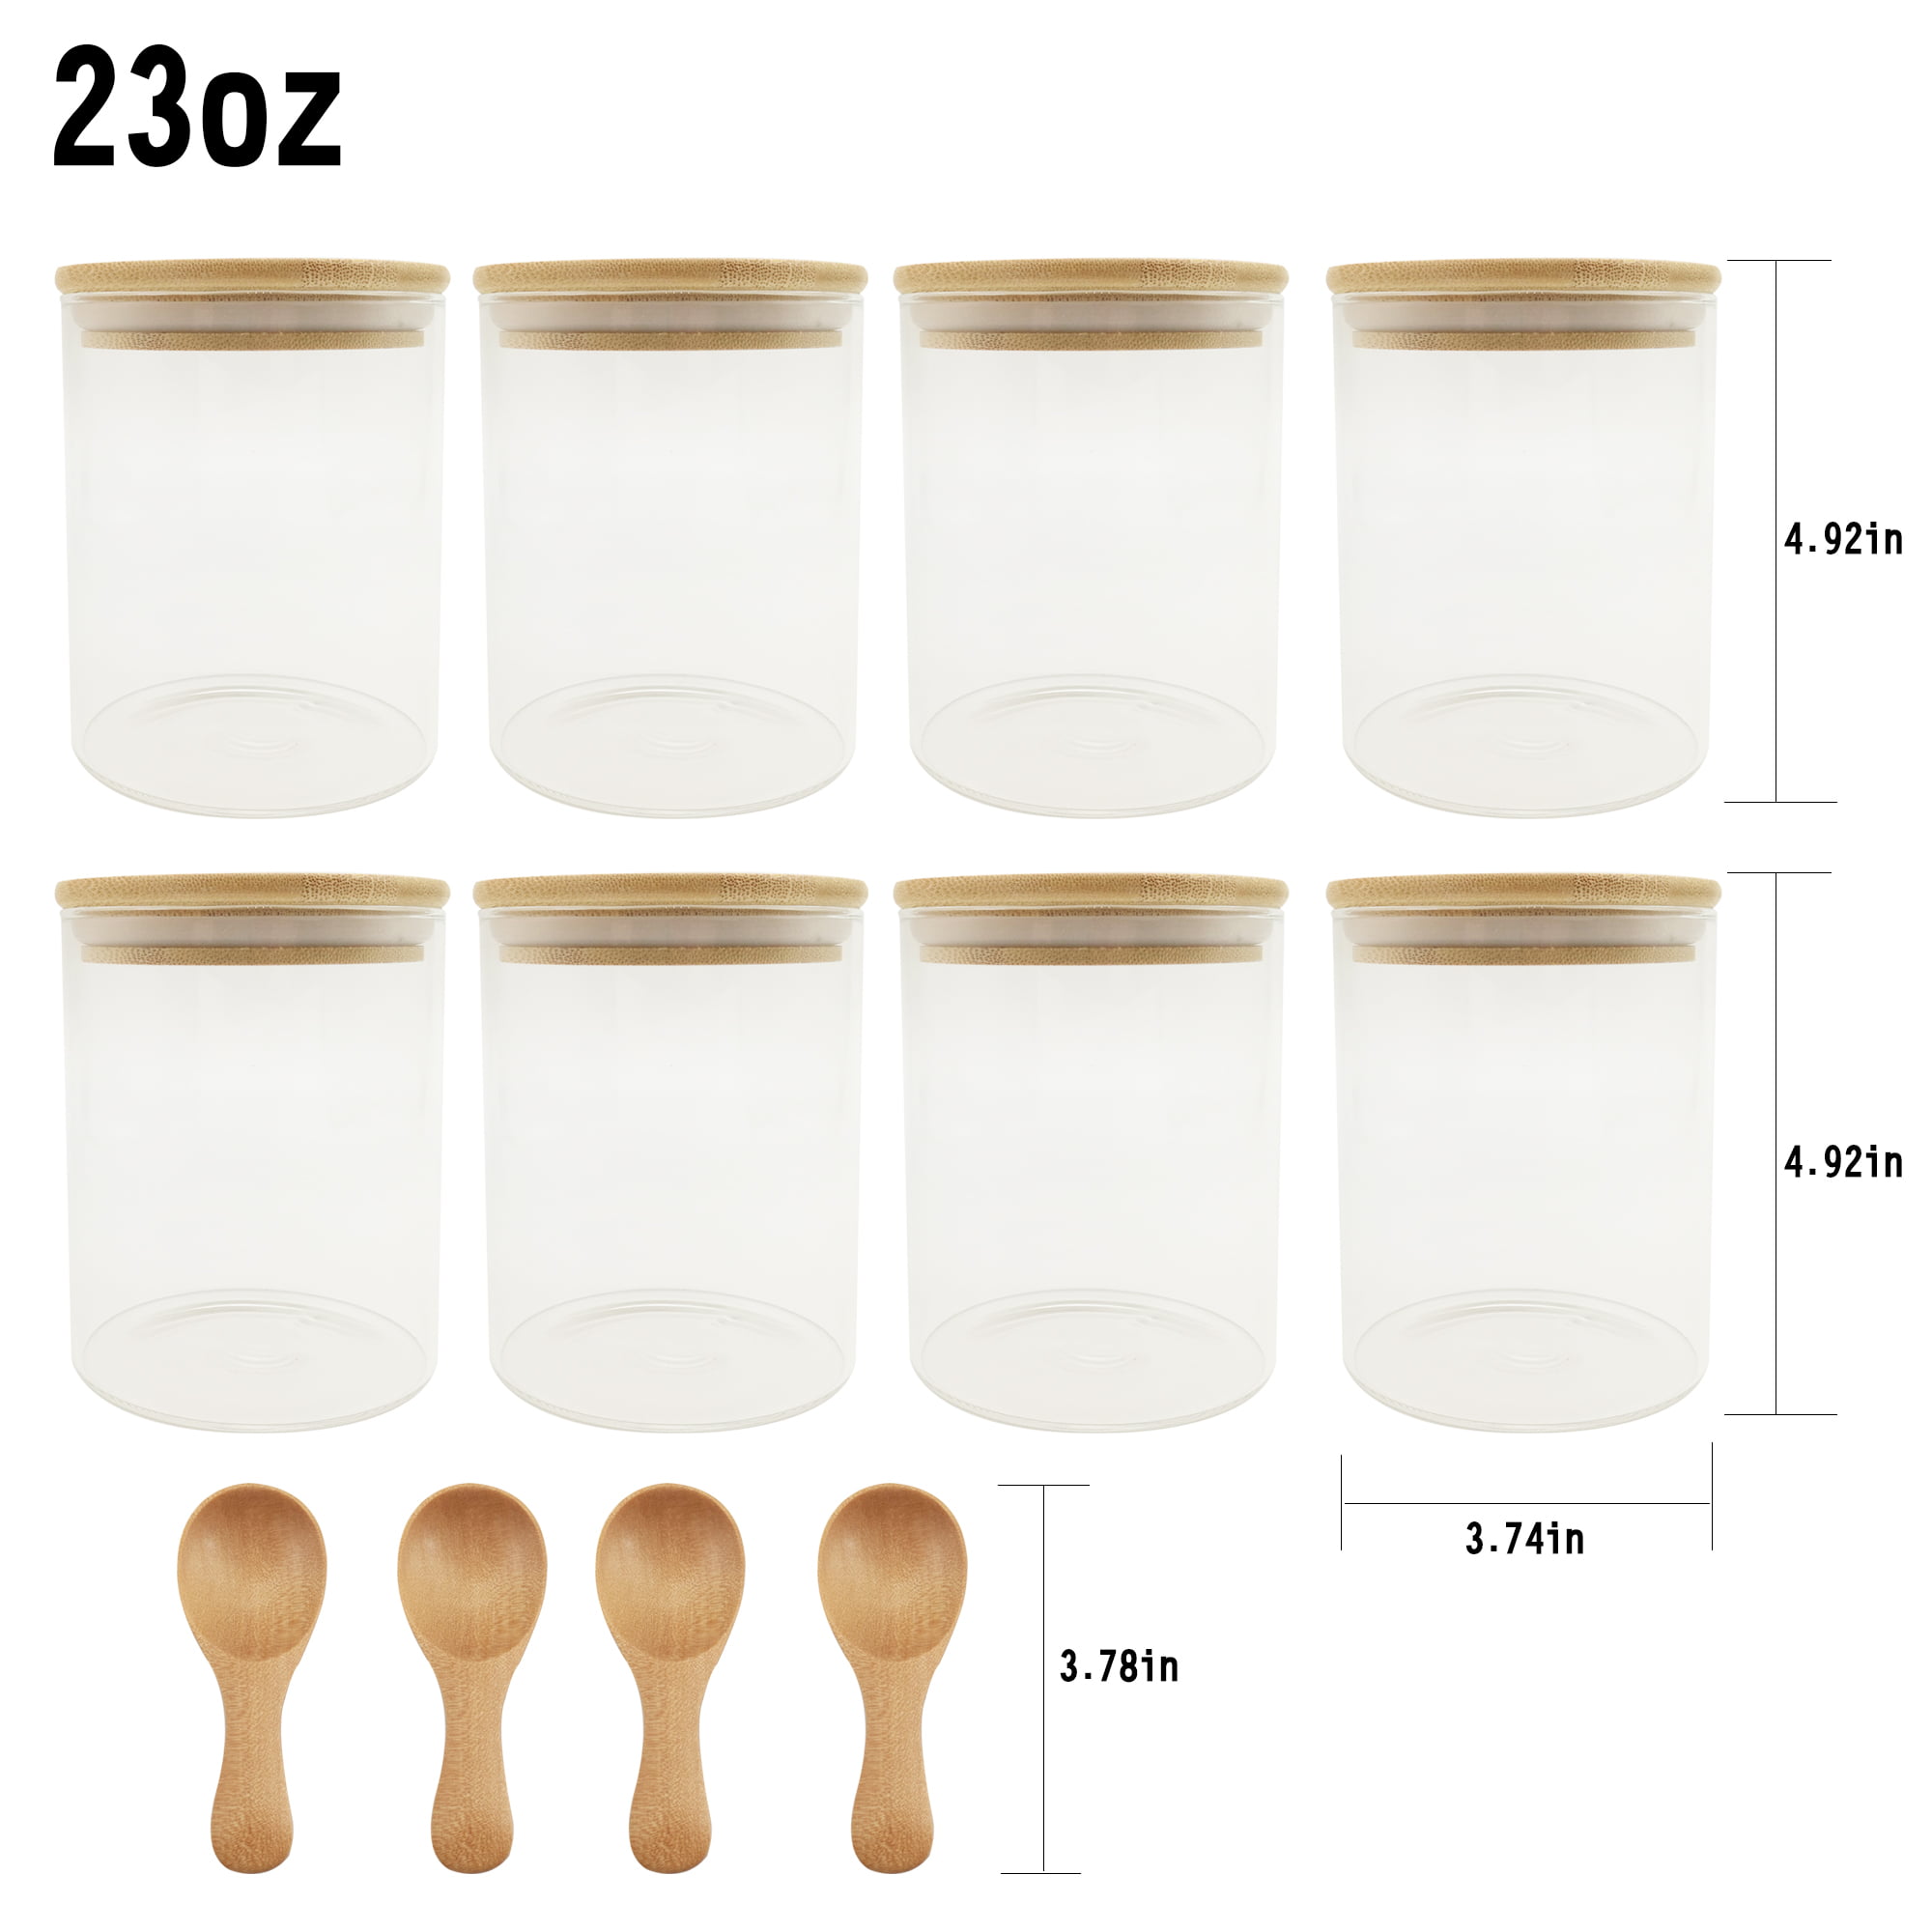 UPTRUST Glass jars 12 pcs Spice Jars Set with Bamboo Lids, 6 pcs Small  Condiments Wooden Spoons , Airtight Glass Food Cereal Storage Containers  for Kitchen (Set of 18, 6oz) 